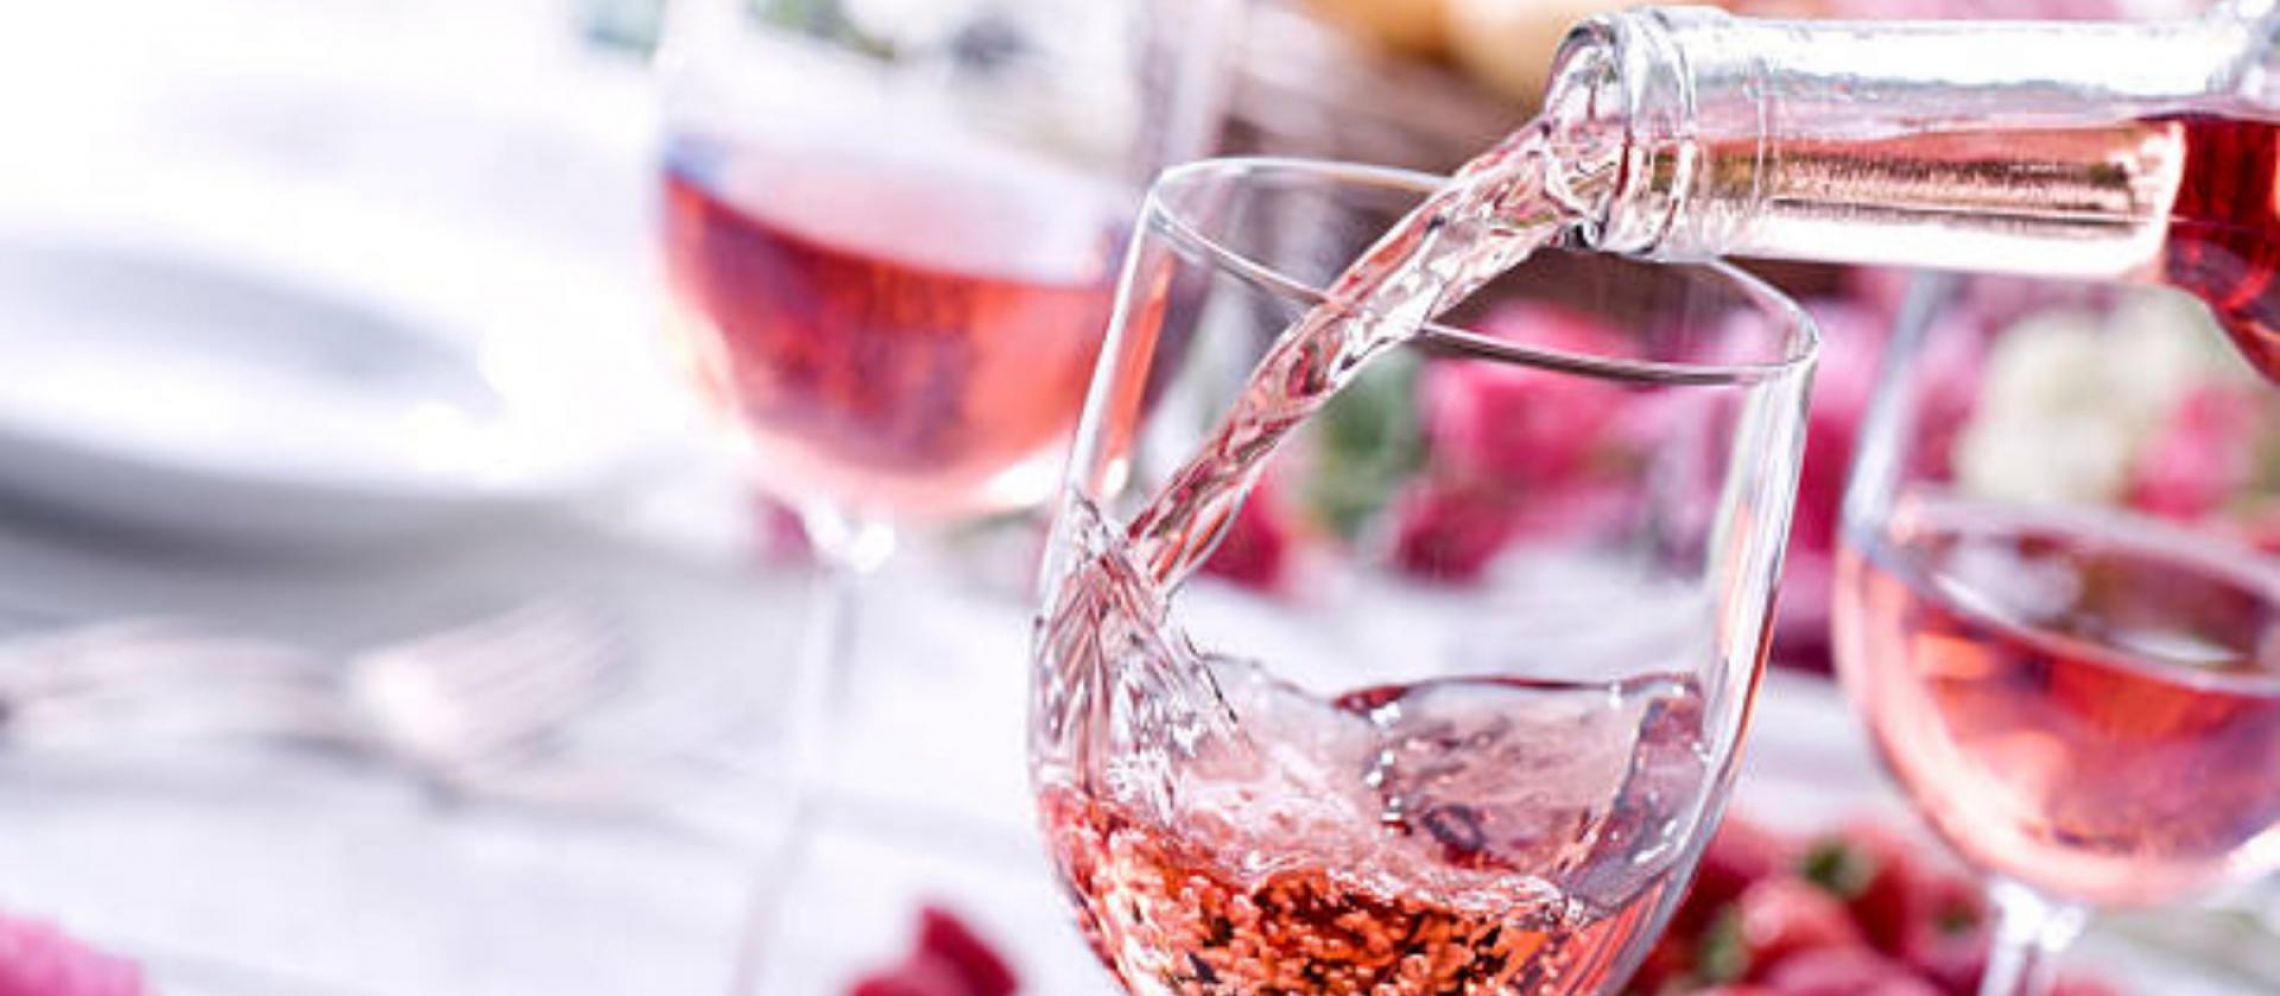 Photo for: The Perfect Rosé Wines For a Savoury Summer.